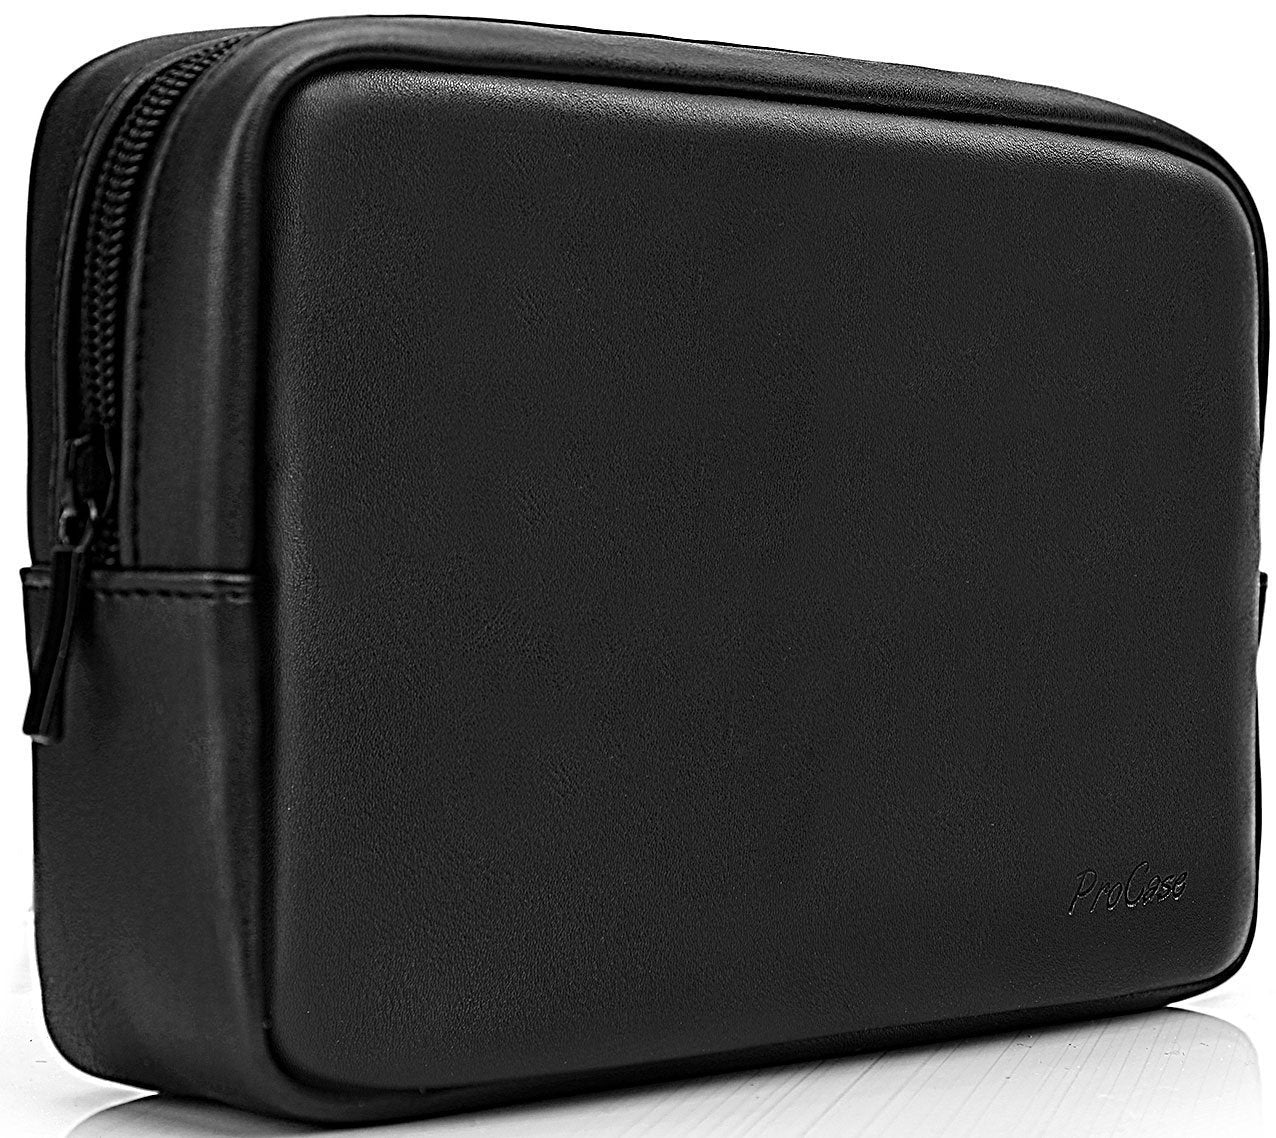 ProCase Hard Travel Electronic Organizer Case for MacBook Power Adapter Chargers Cables Power Bank Apple Magic Mouse Apple Pencil USB Flash Disk SD